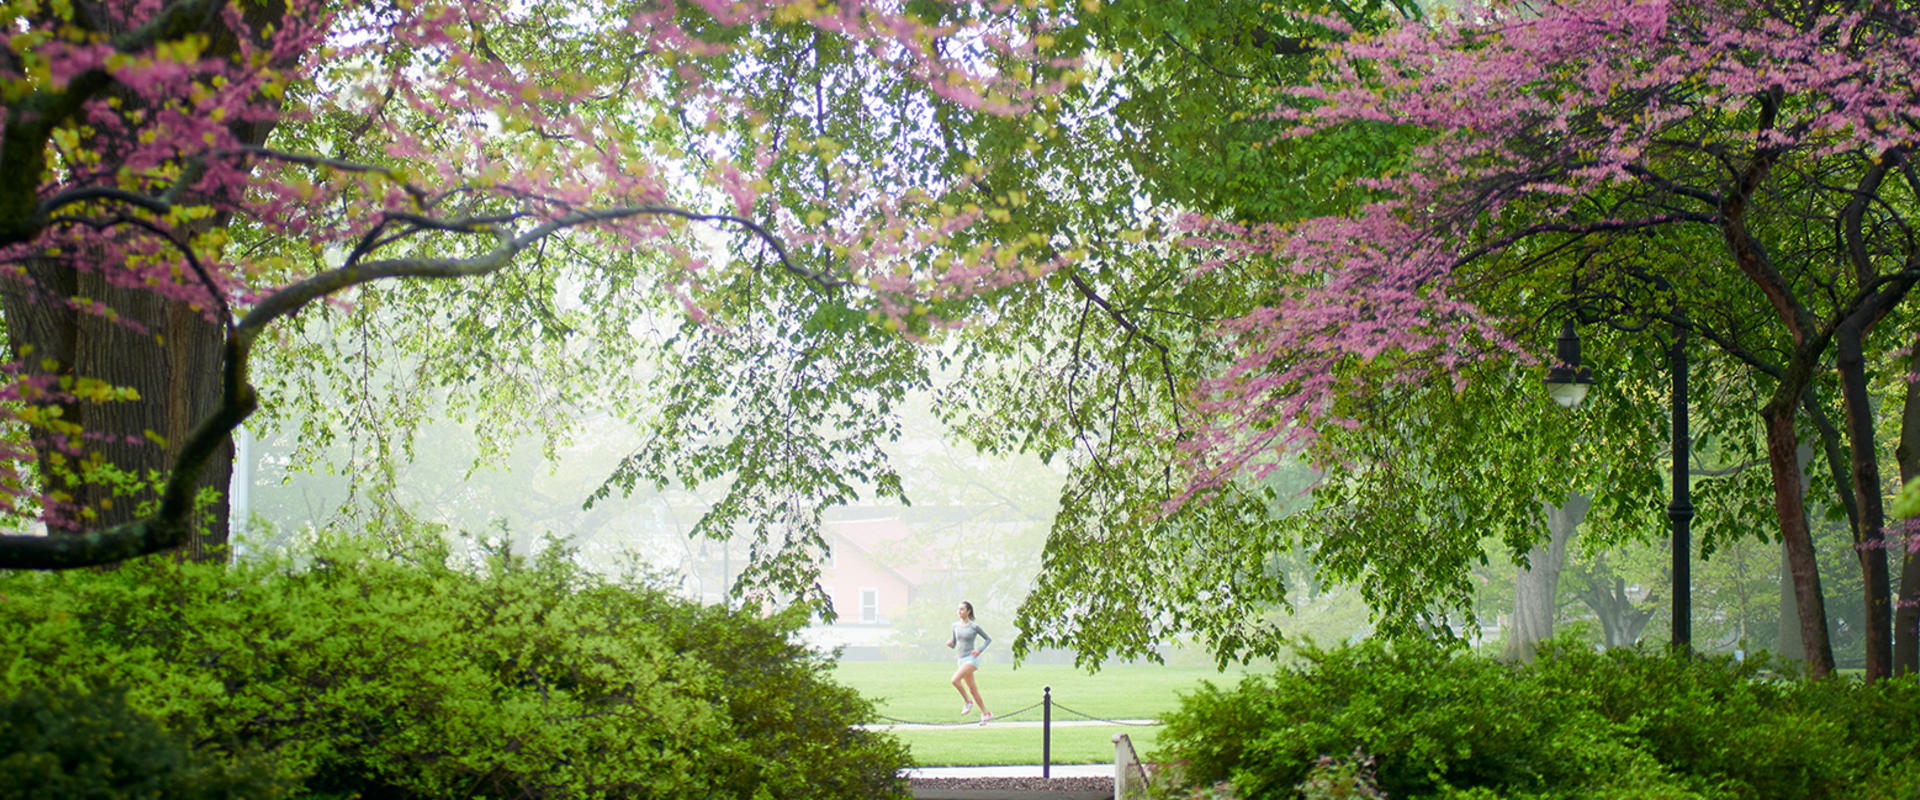 A jogger runs past Old Main during an early morning in spring